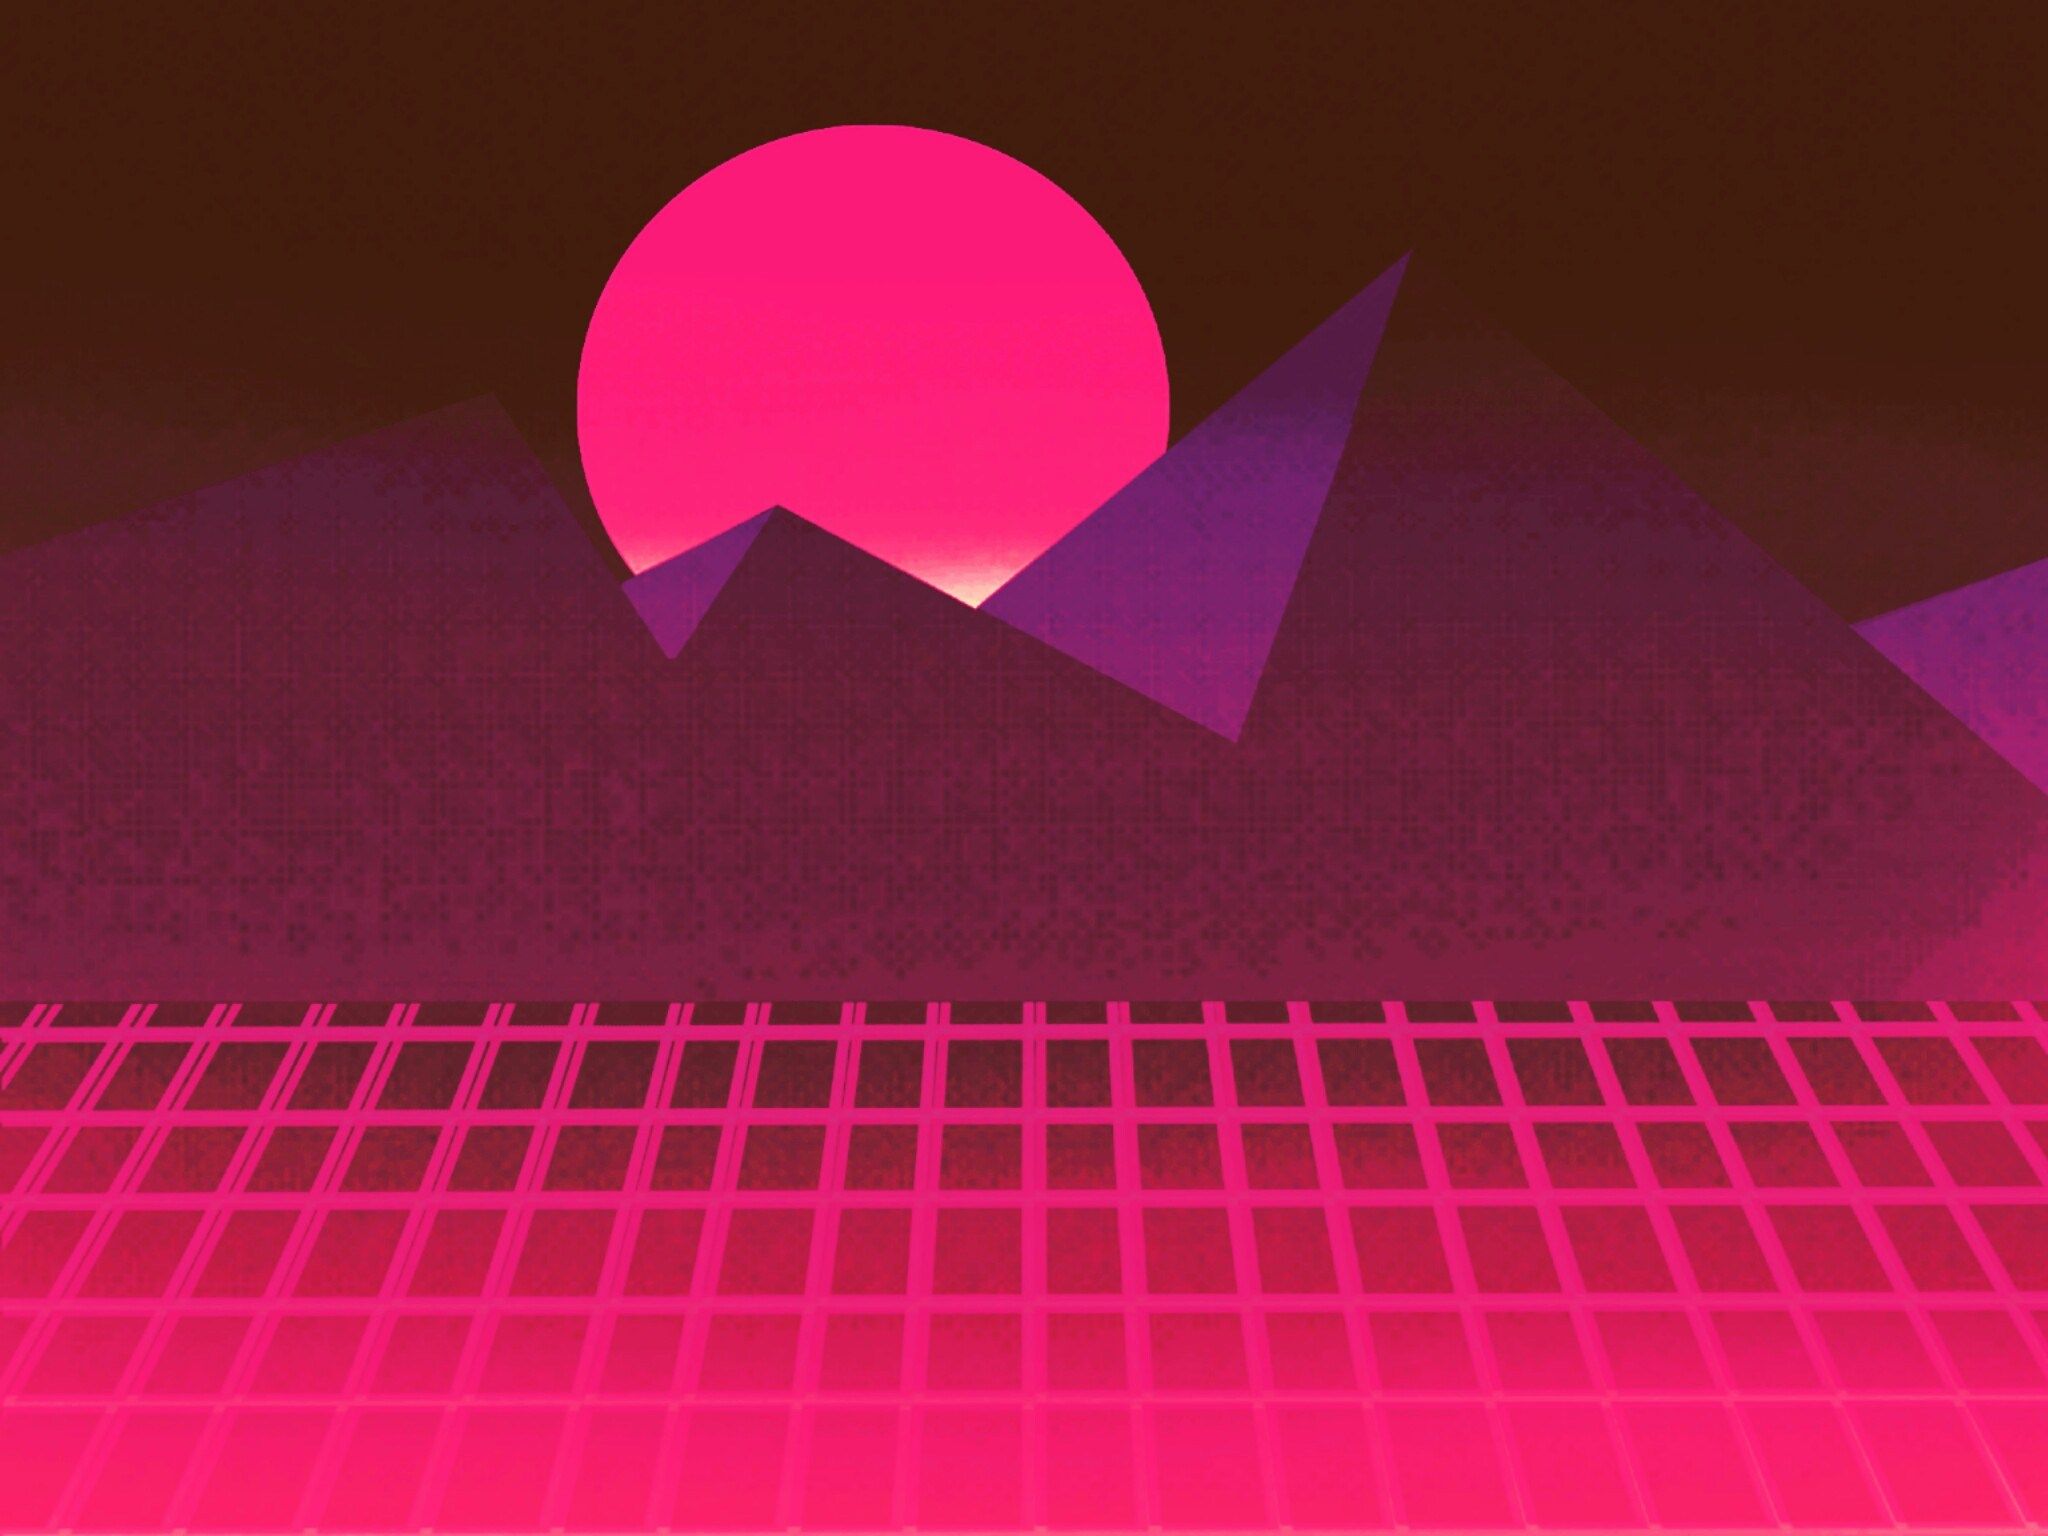 A pink and purple image of mountains - 80s, magenta